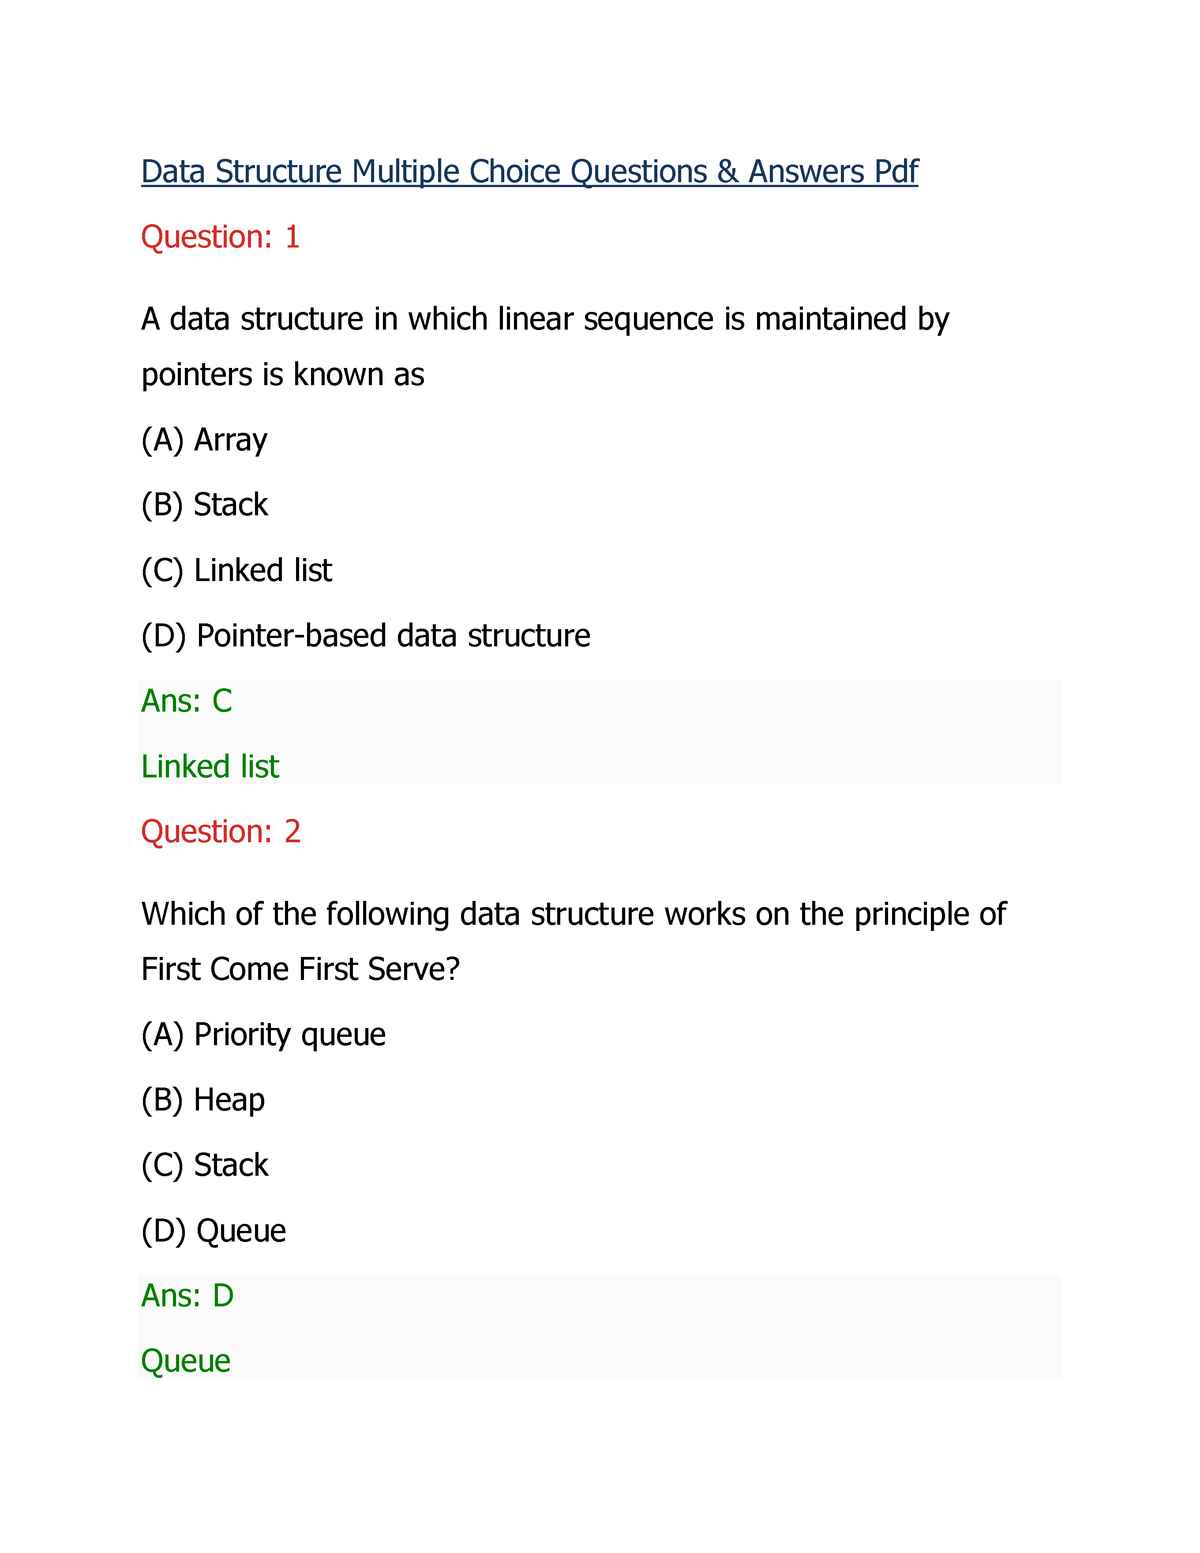 assignment questions on data structure